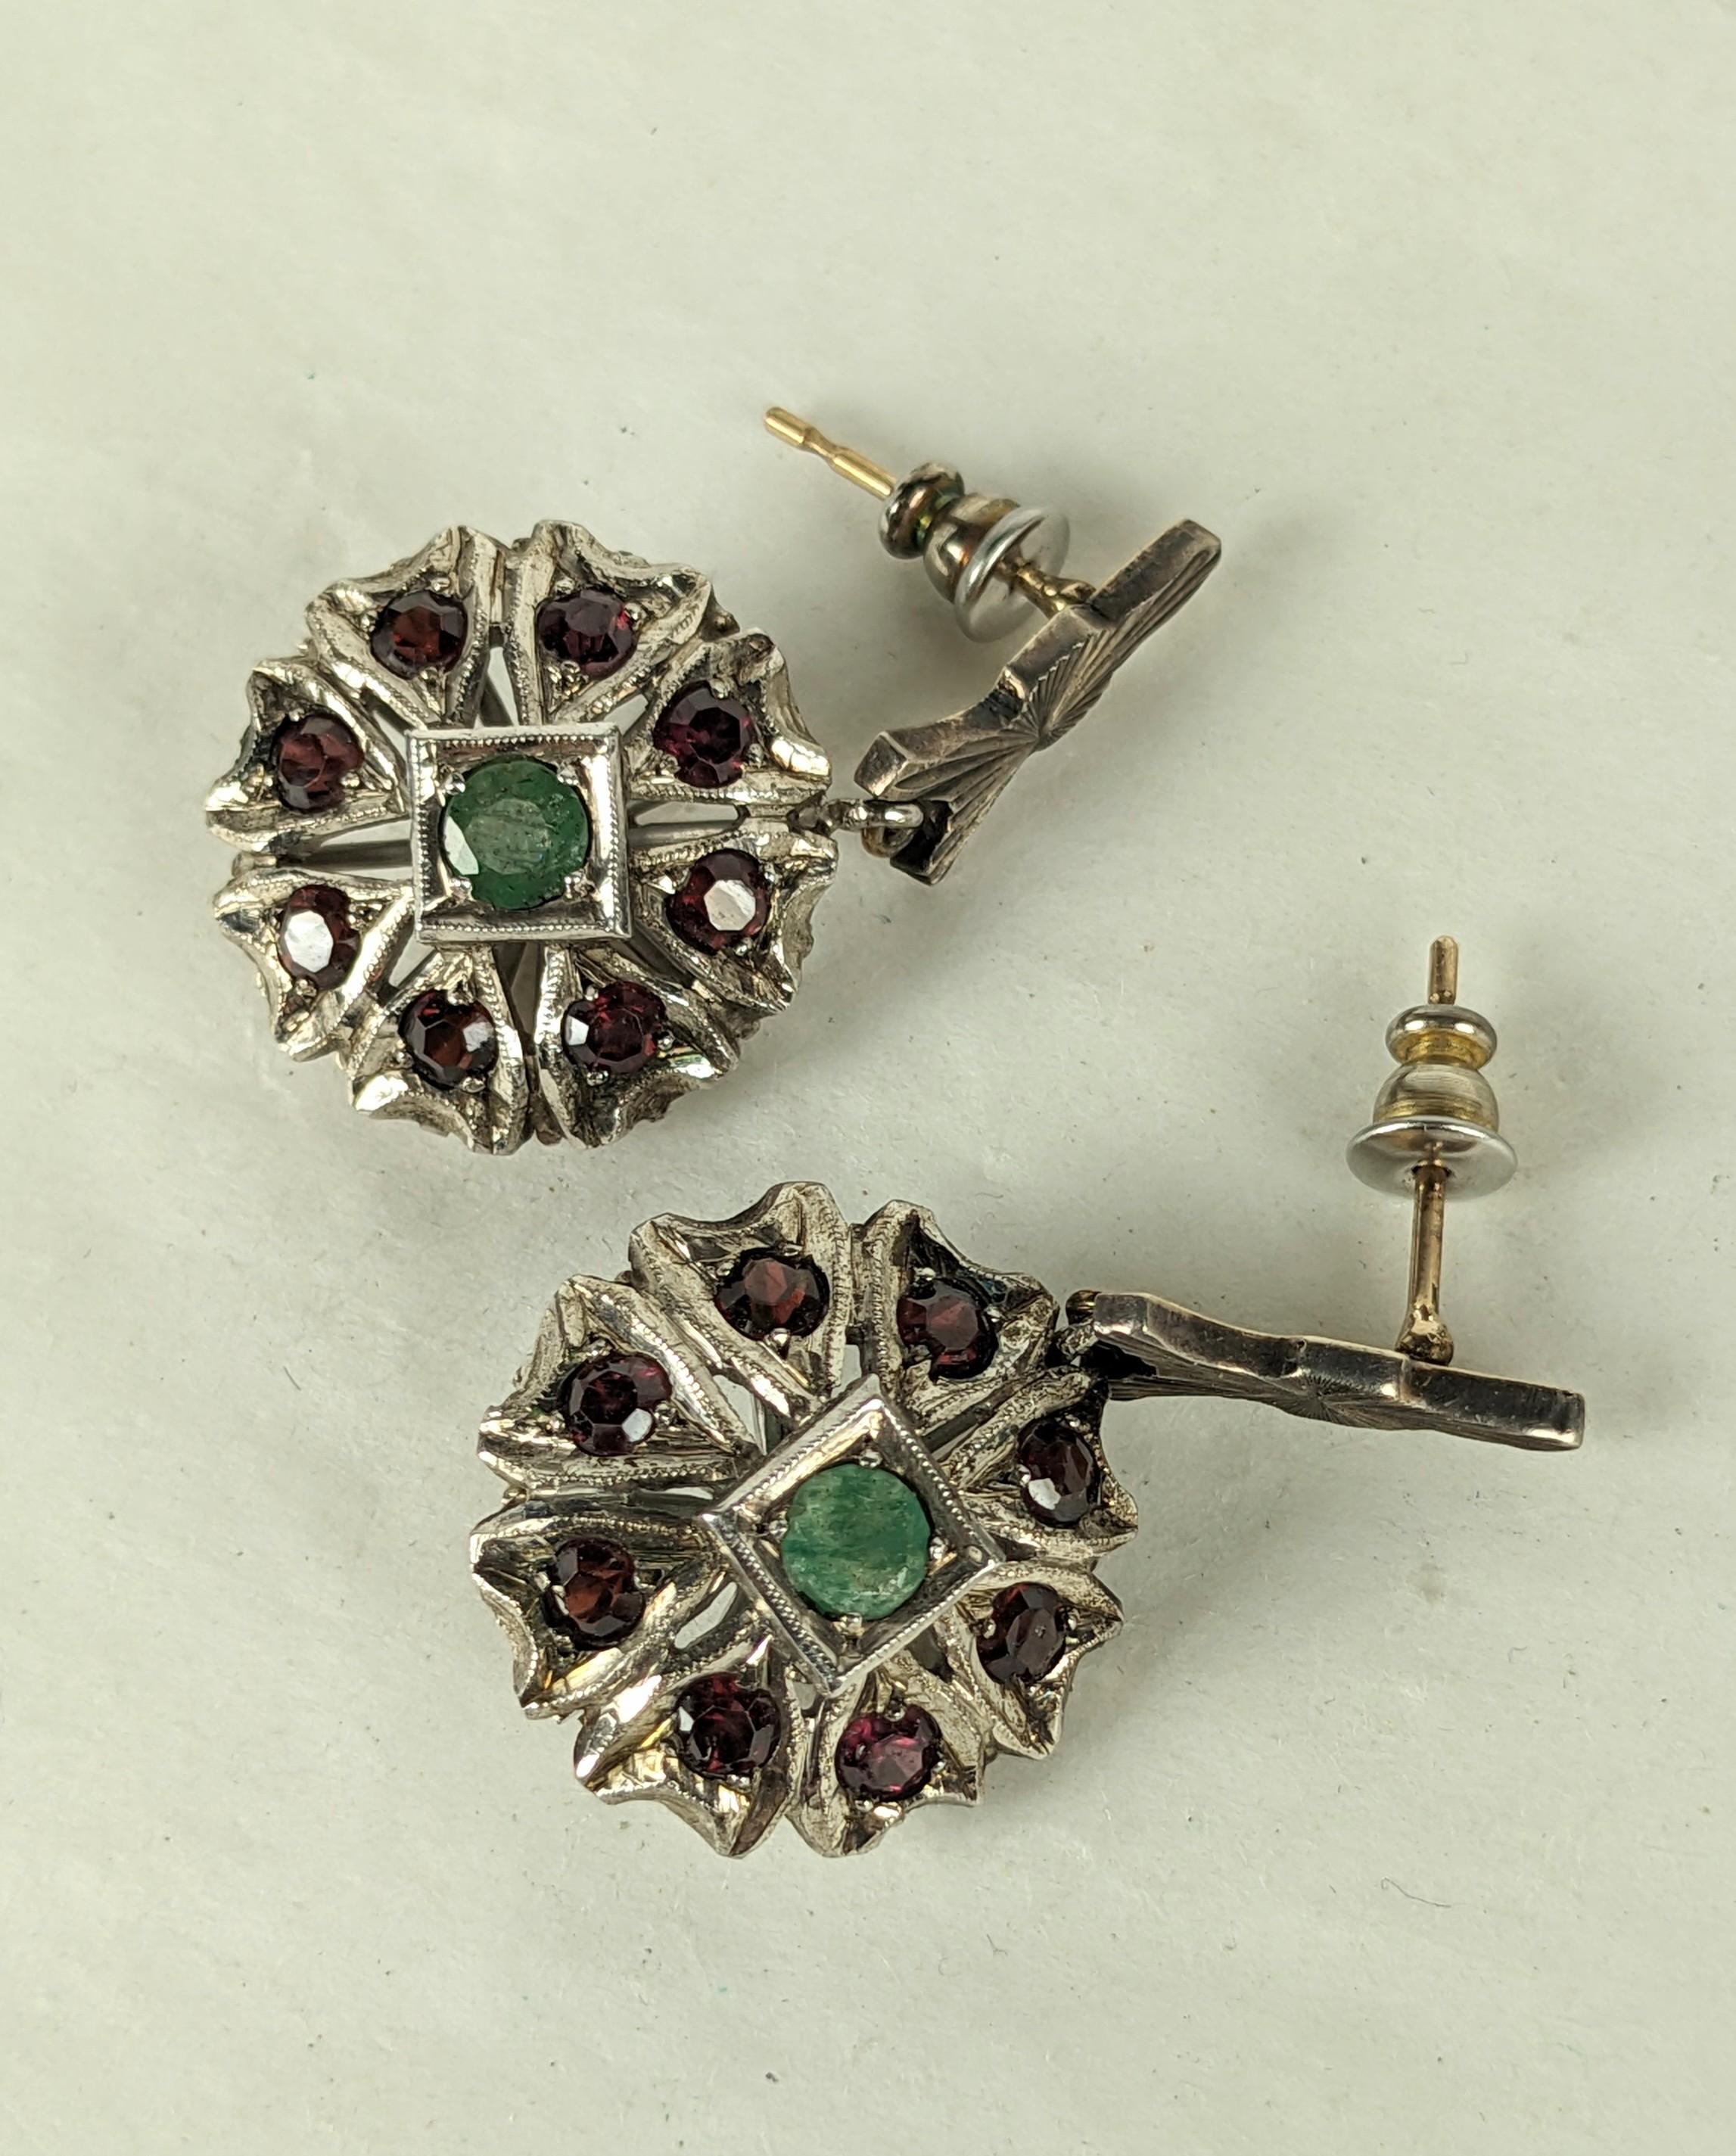 Indian Garnet and Emerald Drop Earrings set in silver from the 1950's. Bombe flower motif set with garnets in the petals with a central emerald. Pierced fittings. 1950's India. 1.5